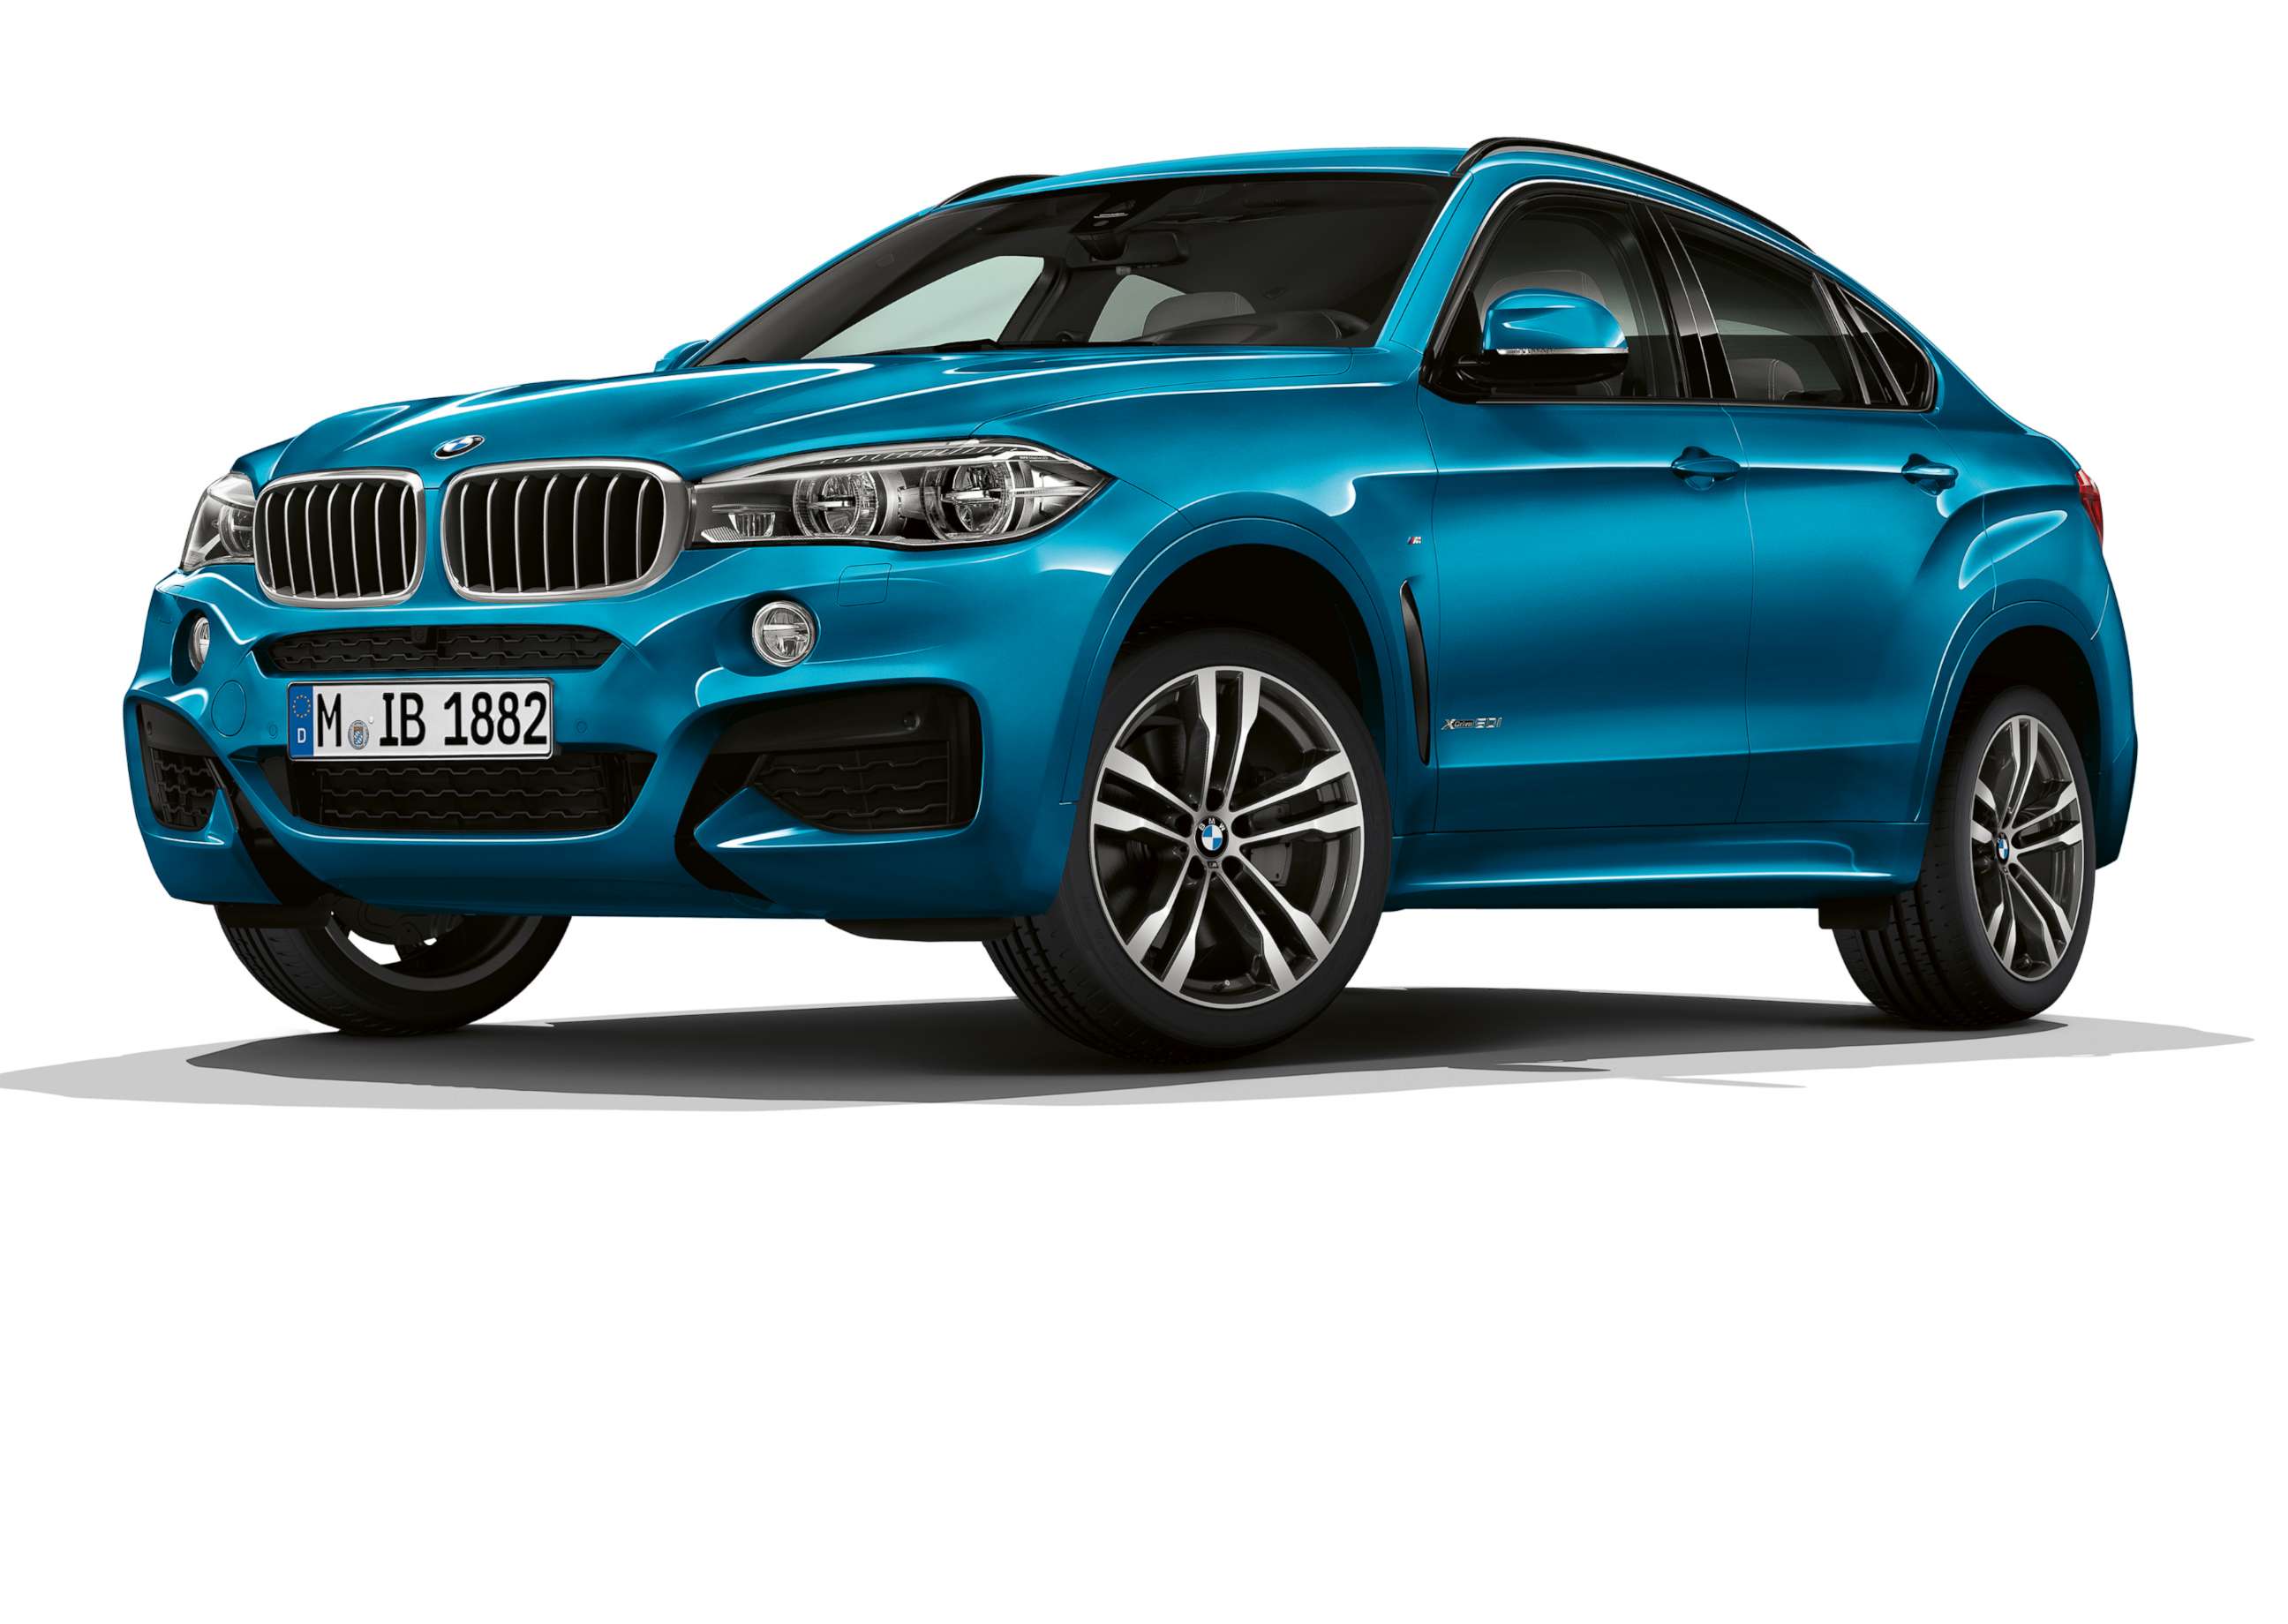 PHOTO: The BMW X6 M is seen here.